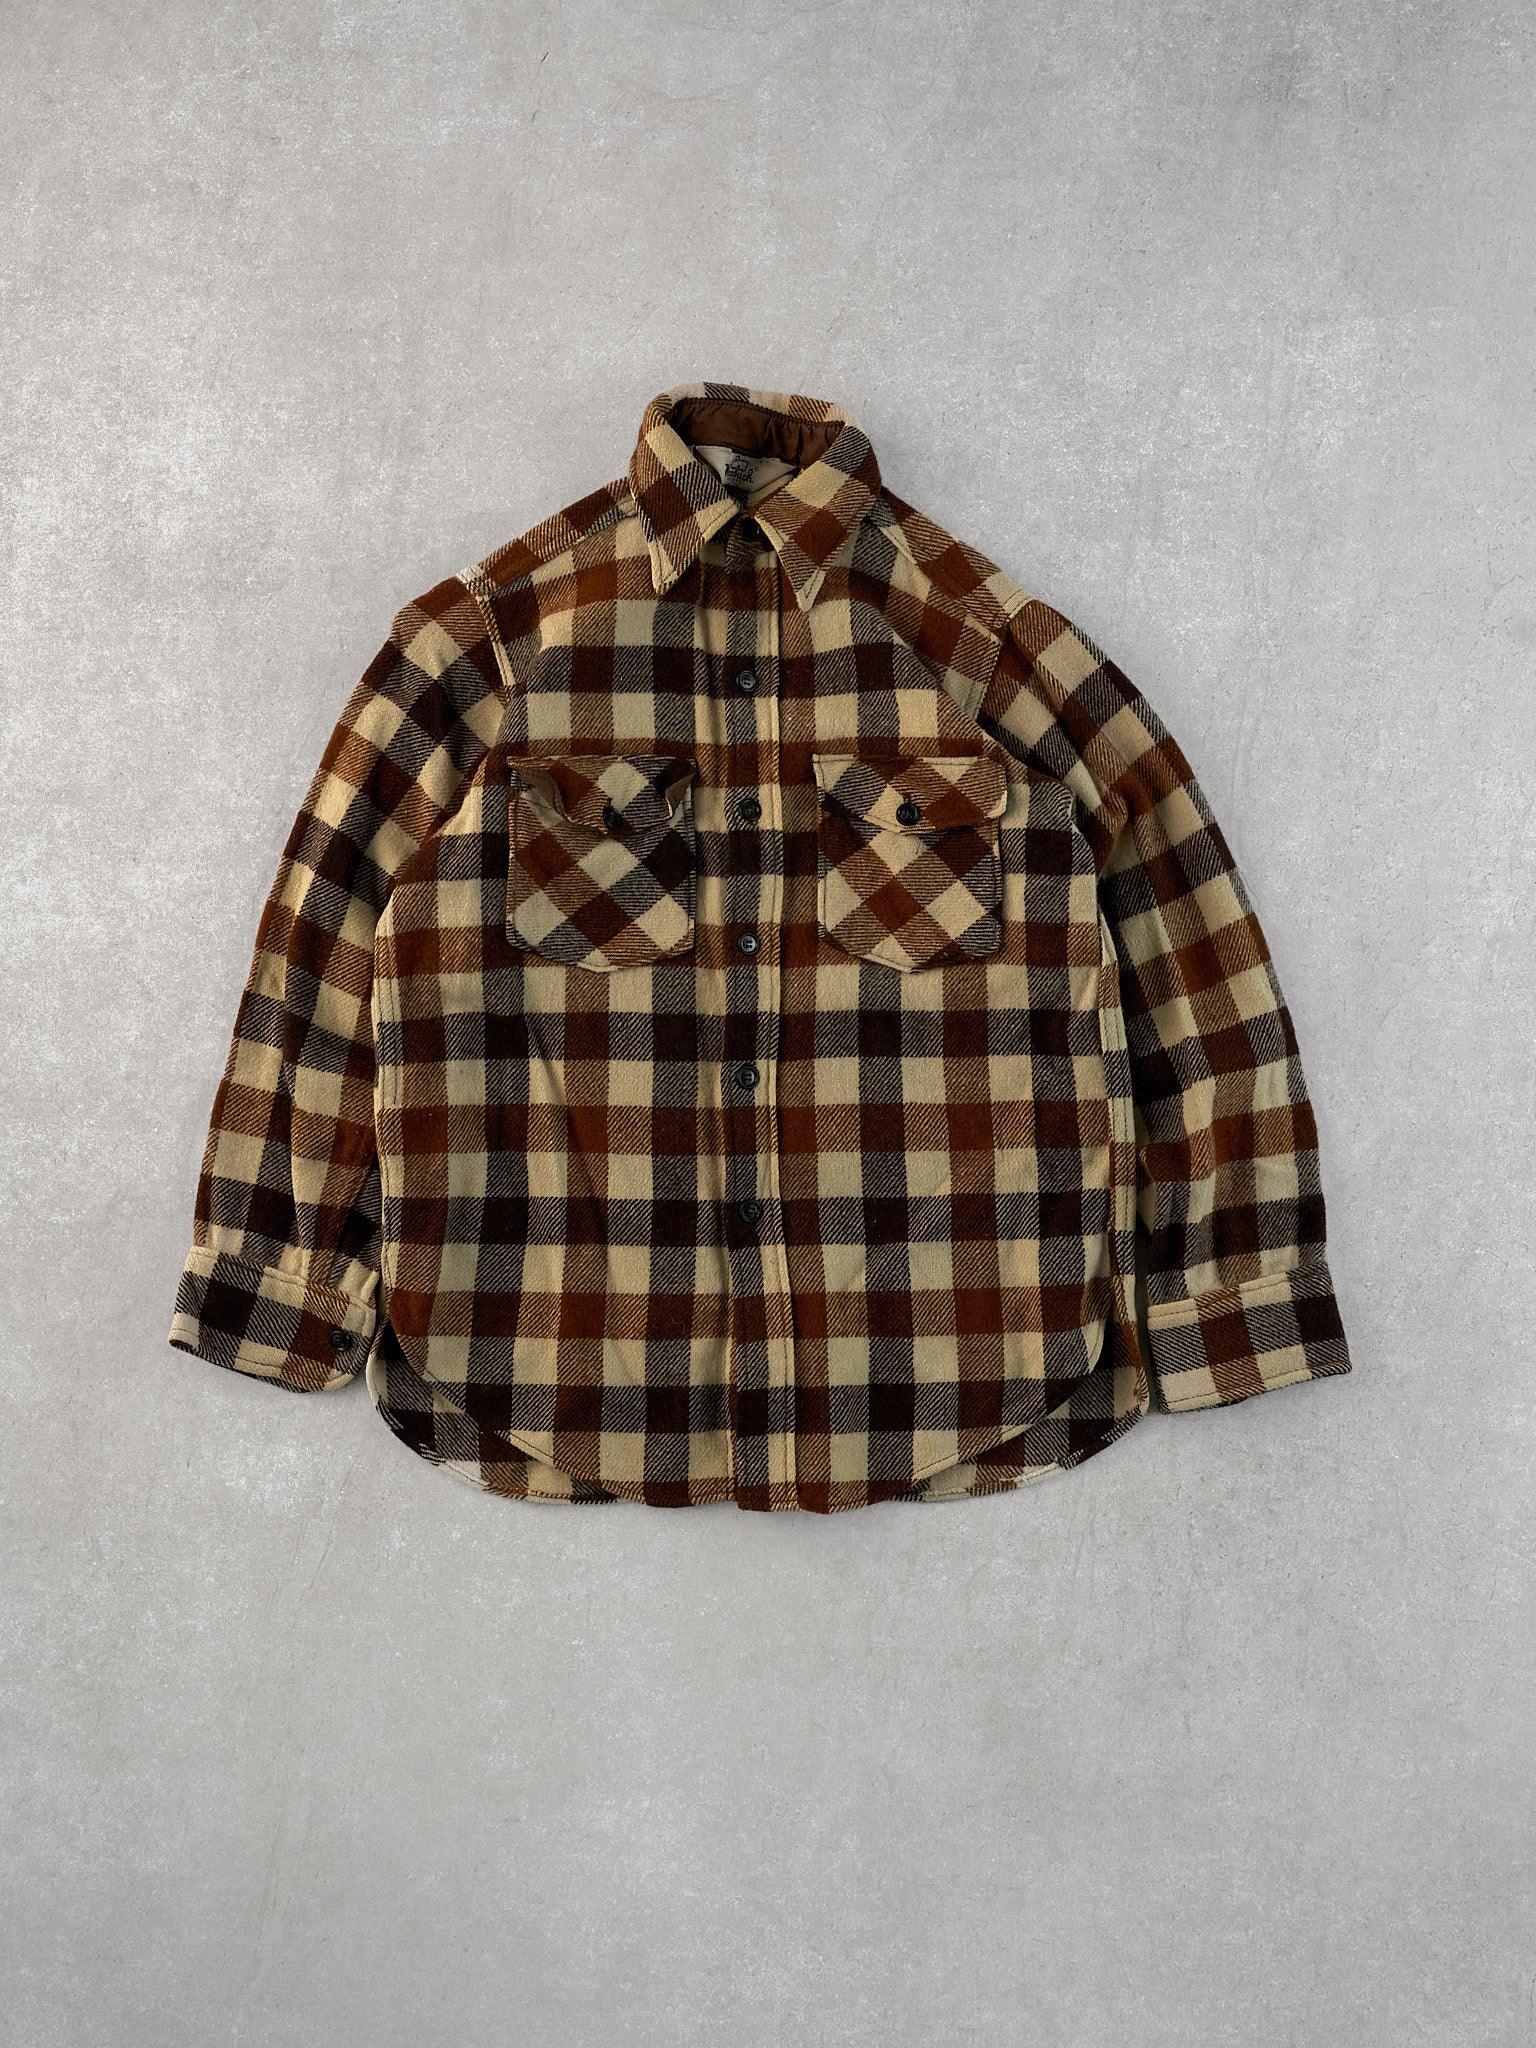 Vintage 90s Brown and Beige Woolrich Plaid Wool Button Up (S)